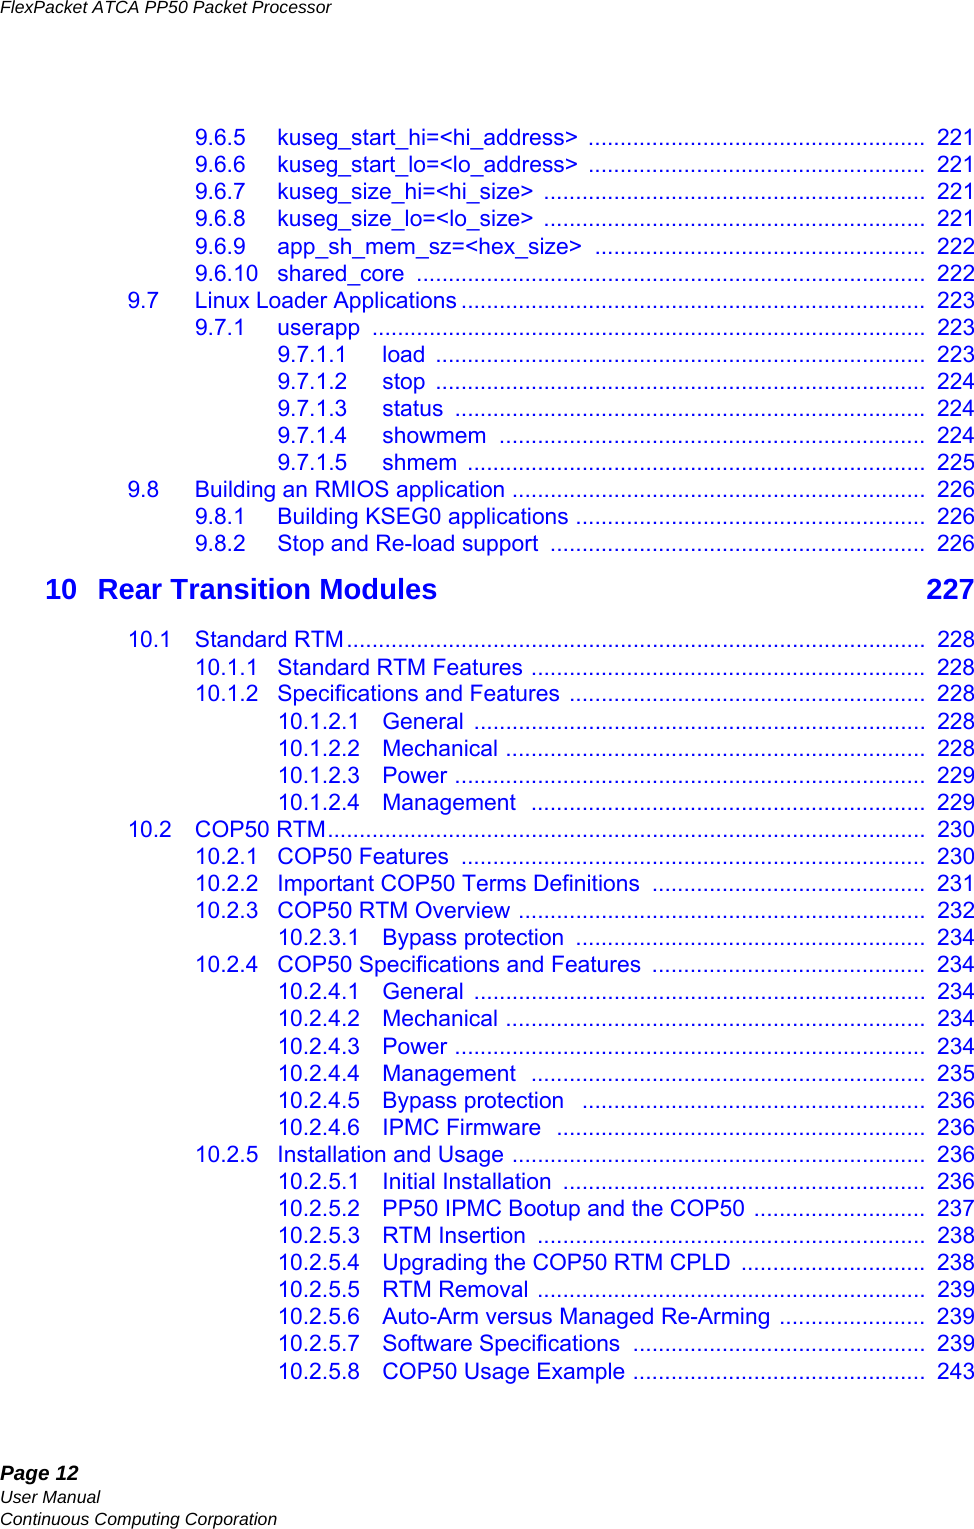 Page 12User ManualContinuous Computing CorporationFlexPacket ATCA PP50 Packet Processor     Preliminary9.6.5 kuseg_start_hi=&lt;hi_address&gt; .....................................................  2219.6.6 kuseg_start_lo=&lt;lo_address&gt; .....................................................  2219.6.7 kuseg_size_hi=&lt;hi_size&gt; ............................................................  2219.6.8 kuseg_size_lo=&lt;lo_size&gt; ............................................................  2219.6.9 app_sh_mem_sz=&lt;hex_size&gt; ....................................................  2229.6.10 shared_core ................................................................................  2229.7 Linux Loader Applications .........................................................................  2239.7.1 userapp .......................................................................................  2239.7.1.1 load .............................................................................  2239.7.1.2 stop .............................................................................  2249.7.1.3 status ..........................................................................  2249.7.1.4 showmem ...................................................................  2249.7.1.5 shmem ........................................................................  2259.8 Building an RMIOS application .................................................................  2269.8.1 Building KSEG0 applications .......................................................  2269.8.2 Stop and Re-load support  ...........................................................  22610 Rear Transition Modules   22710.1 Standard RTM...........................................................................................  22810.1.1 Standard RTM Features ..............................................................  22810.1.2 Specifications and Features ........................................................  22810.1.2.1 General .......................................................................  22810.1.2.2 Mechanical ..................................................................  22810.1.2.3 Power ..........................................................................  22910.1.2.4 Management  ..............................................................  22910.2 COP50 RTM..............................................................................................  23010.2.1 COP50 Features  .........................................................................  23010.2.2 Important COP50 Terms Definitions  ...........................................  23110.2.3 COP50 RTM Overview ................................................................  23210.2.3.1 Bypass protection  .......................................................  23410.2.4 COP50 Specifications and Features  ...........................................  23410.2.4.1 General .......................................................................  23410.2.4.2 Mechanical ..................................................................  23410.2.4.3 Power ..........................................................................  23410.2.4.4 Management  ..............................................................  23510.2.4.5 Bypass protection   ......................................................  23610.2.4.6 IPMC Firmware  ..........................................................  23610.2.5 Installation and Usage .................................................................  23610.2.5.1 Initial Installation  .........................................................  23610.2.5.2 PP50 IPMC Bootup and the COP50 ...........................  23710.2.5.3 RTM Insertion  .............................................................  23810.2.5.4 Upgrading the COP50 RTM CPLD  .............................  23810.2.5.5 RTM Removal .............................................................  23910.2.5.6 Auto-Arm versus Managed Re-Arming .......................  23910.2.5.7 Software Specifications  ..............................................  23910.2.5.8 COP50 Usage Example ..............................................  243